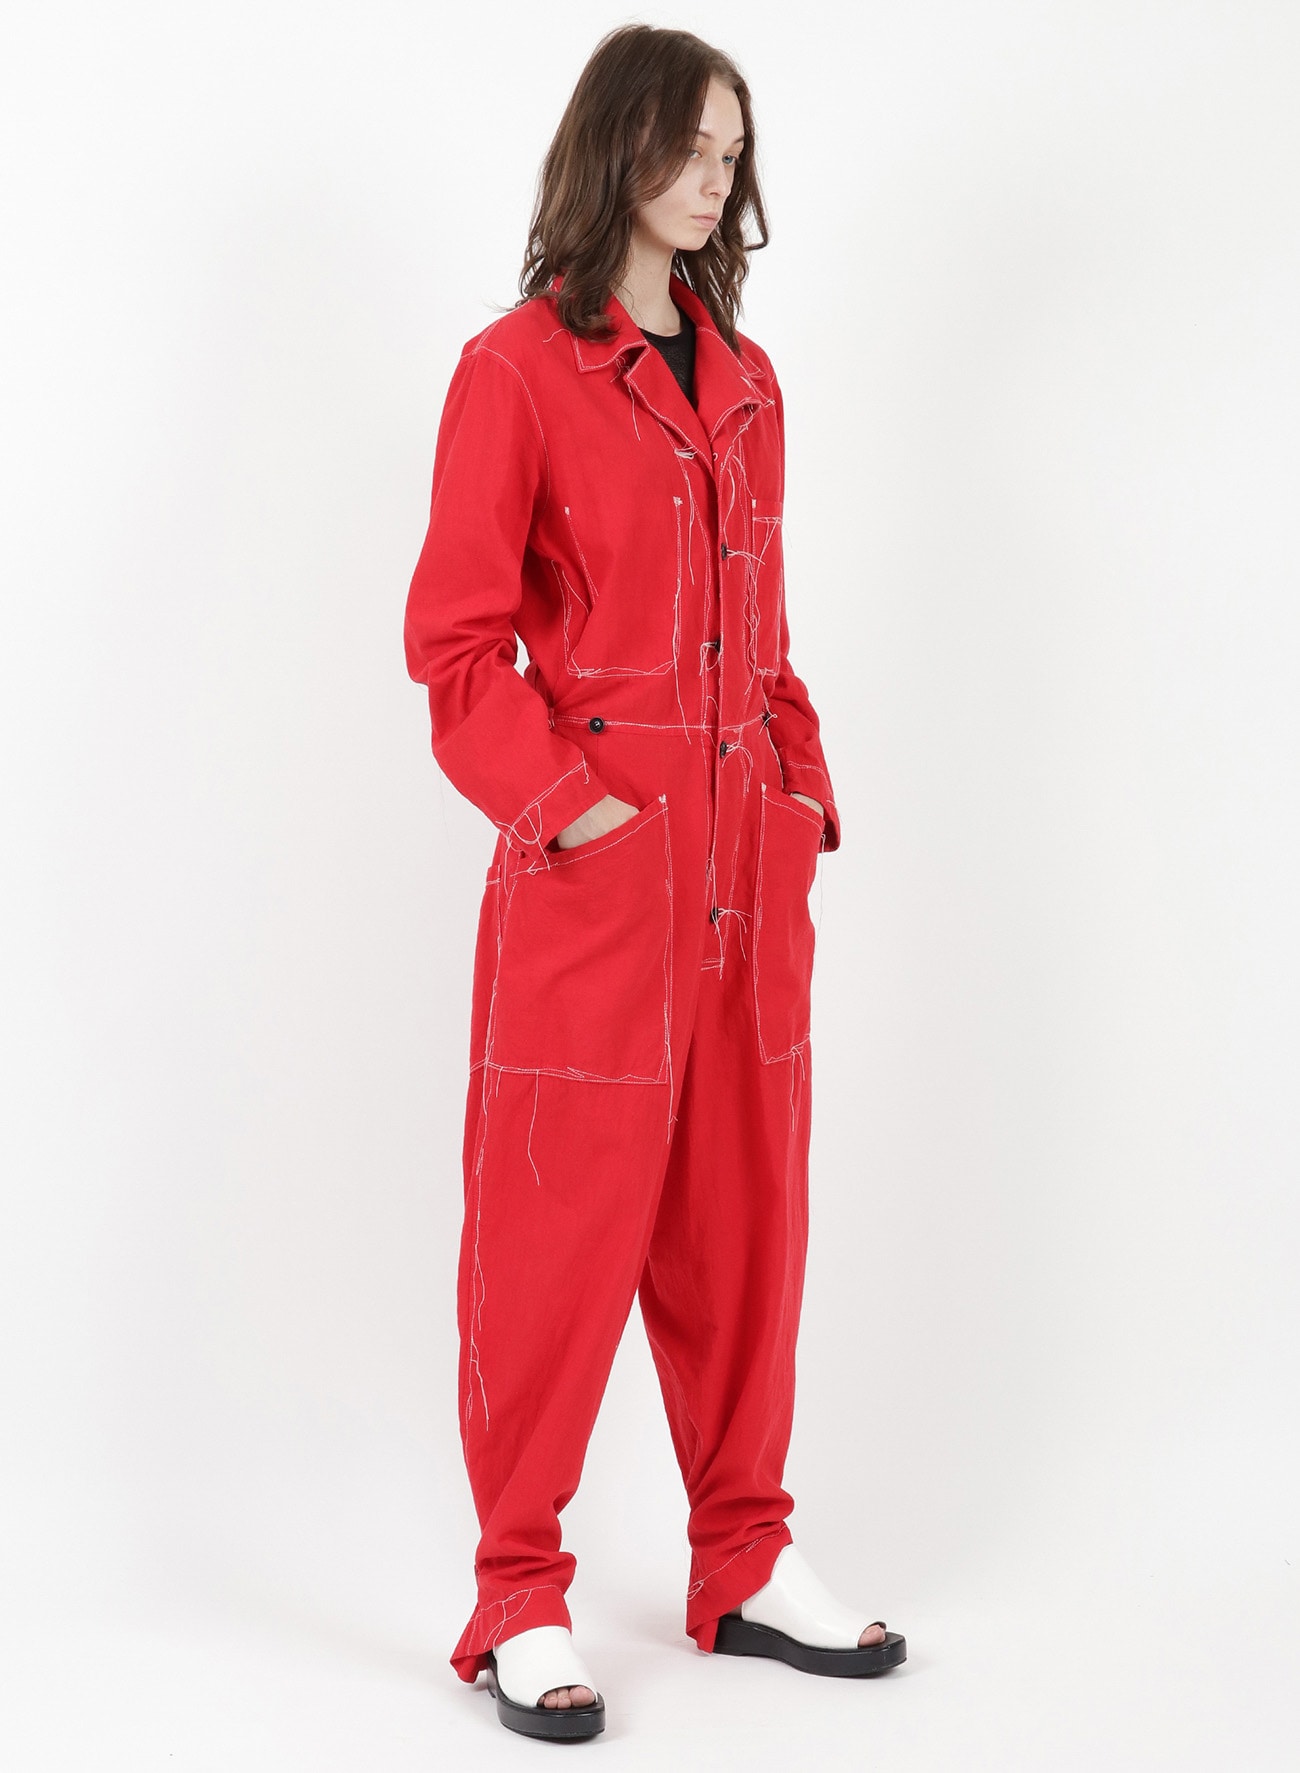 LINEN COTTON CANVAS RANDOM CHECK DYE OVERALL (XS Red): Vintage 